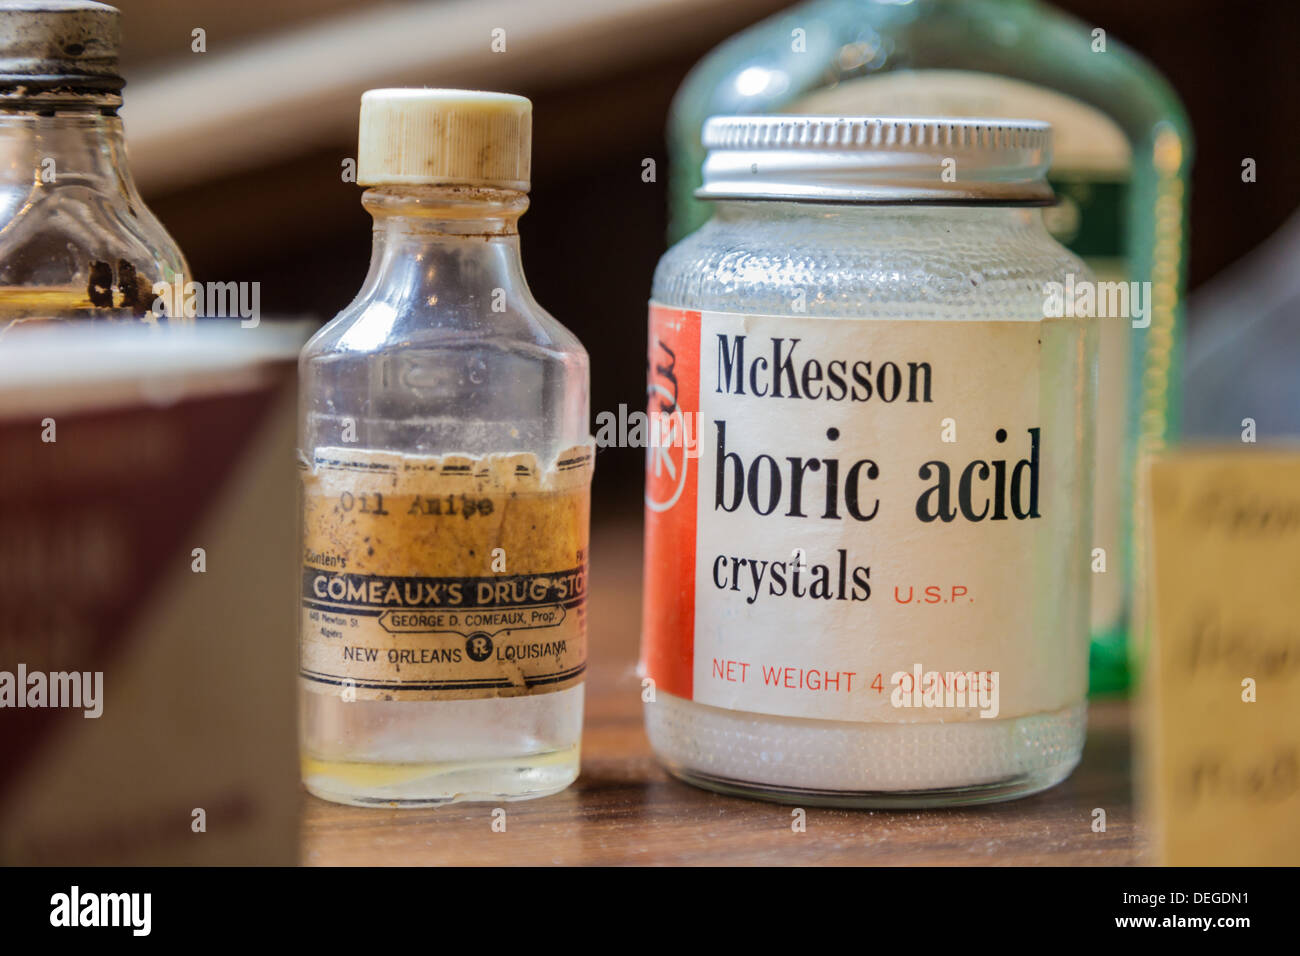 McKesson boric acid crystals and antique jars on display at gift shop in Point Clear, Alabama Stock Photo